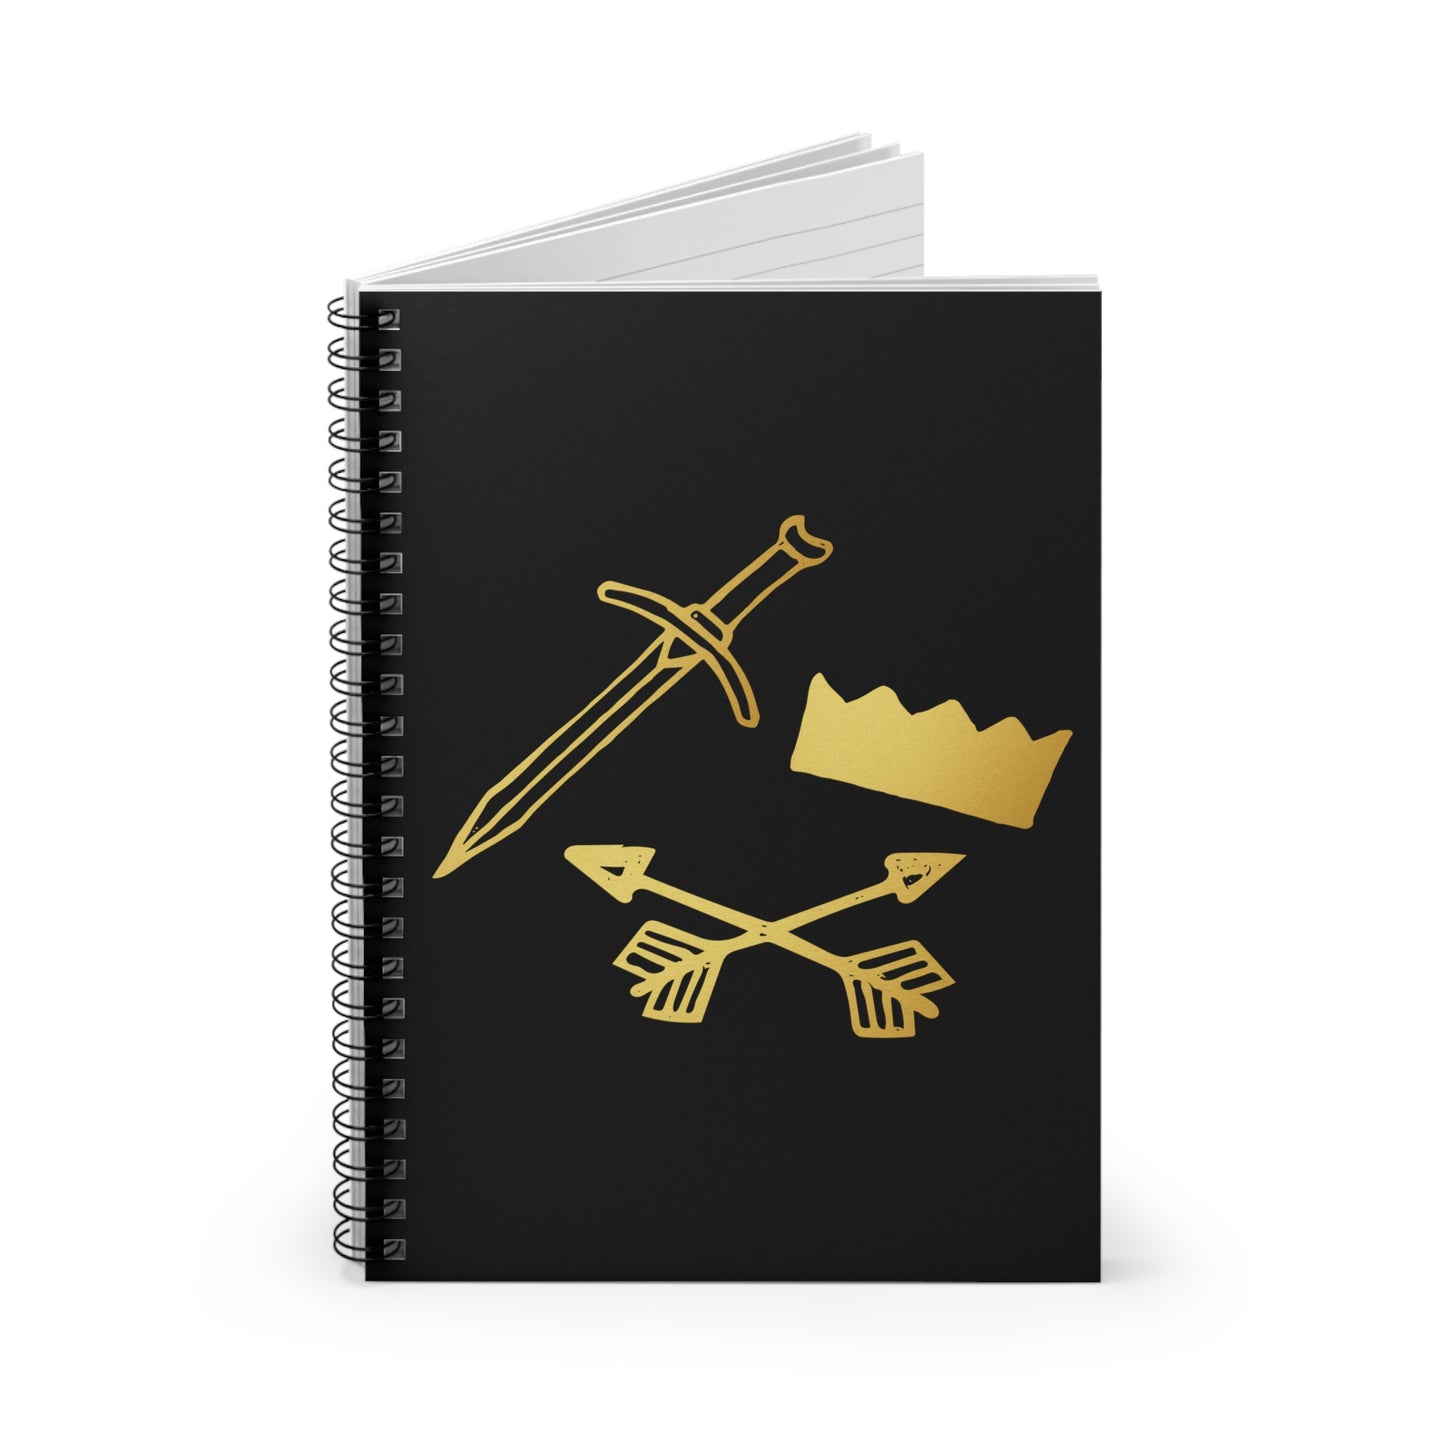 Spiral Notebook - Ruled Line (Gold and Bold Warrior)